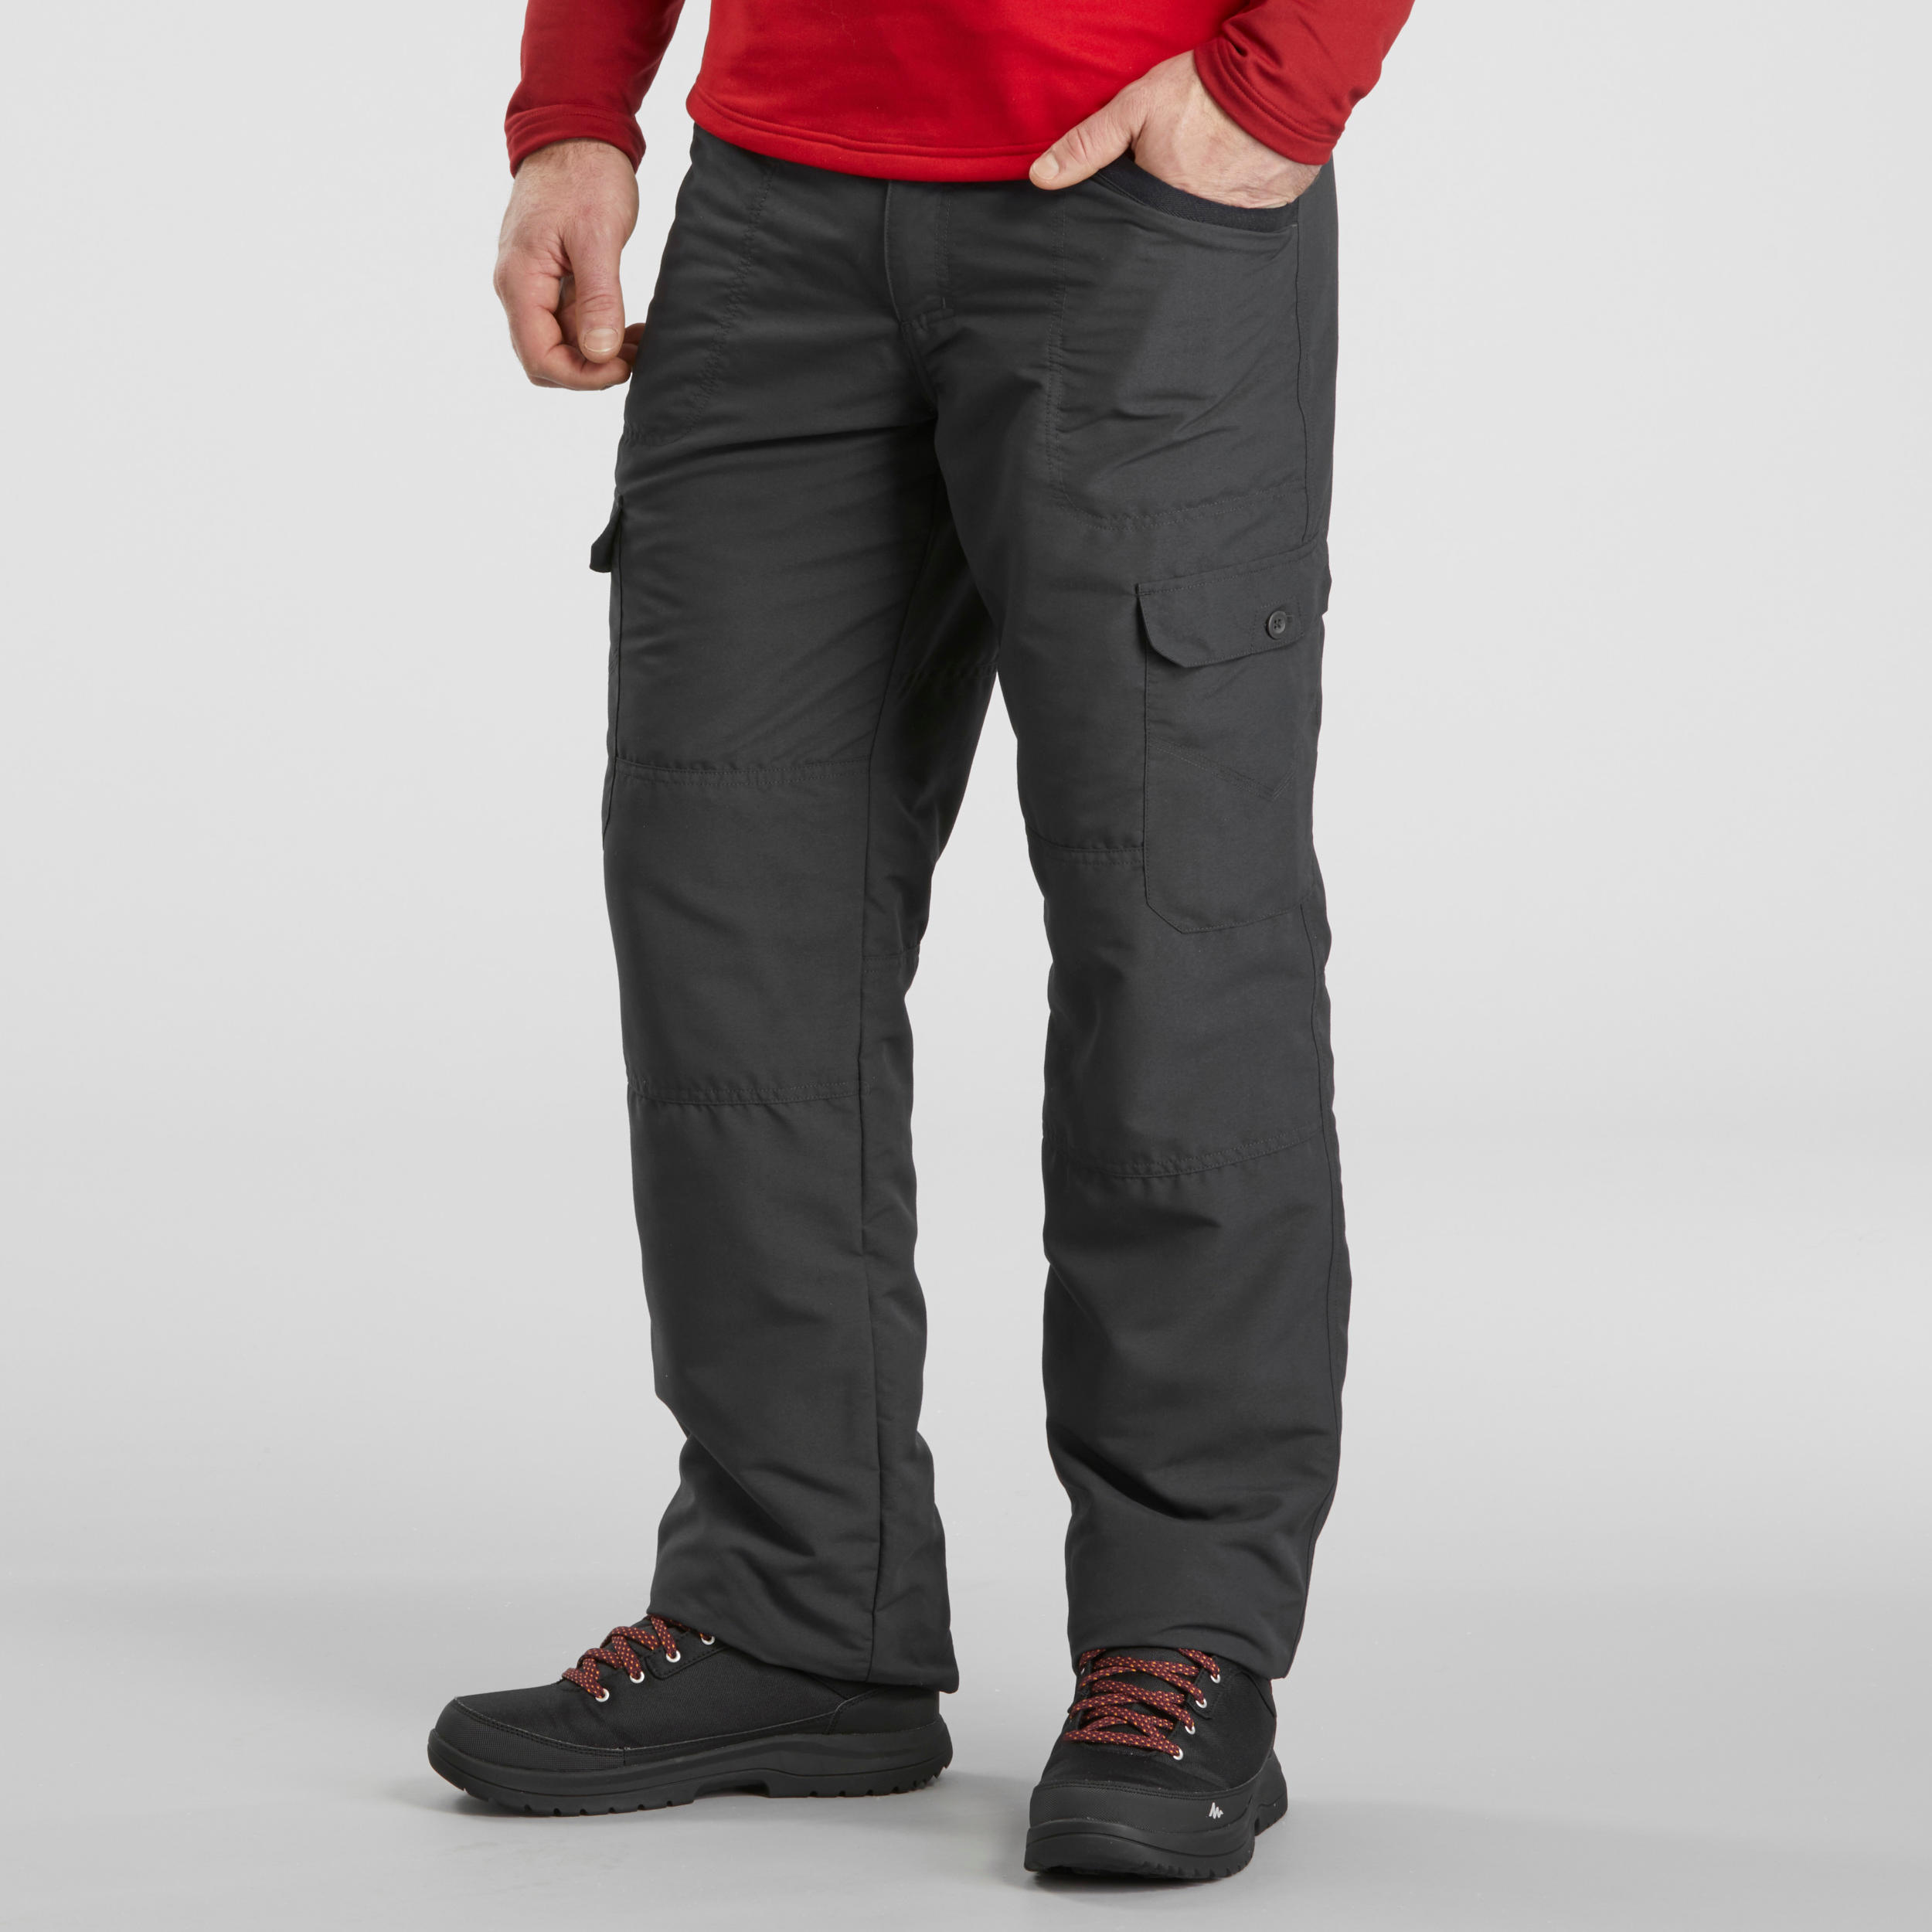 Buy MENS SNOW HIKING WARM WATER REPELLENT STRETCH TROUSERS SH500 XWARM  online  Looksgudin